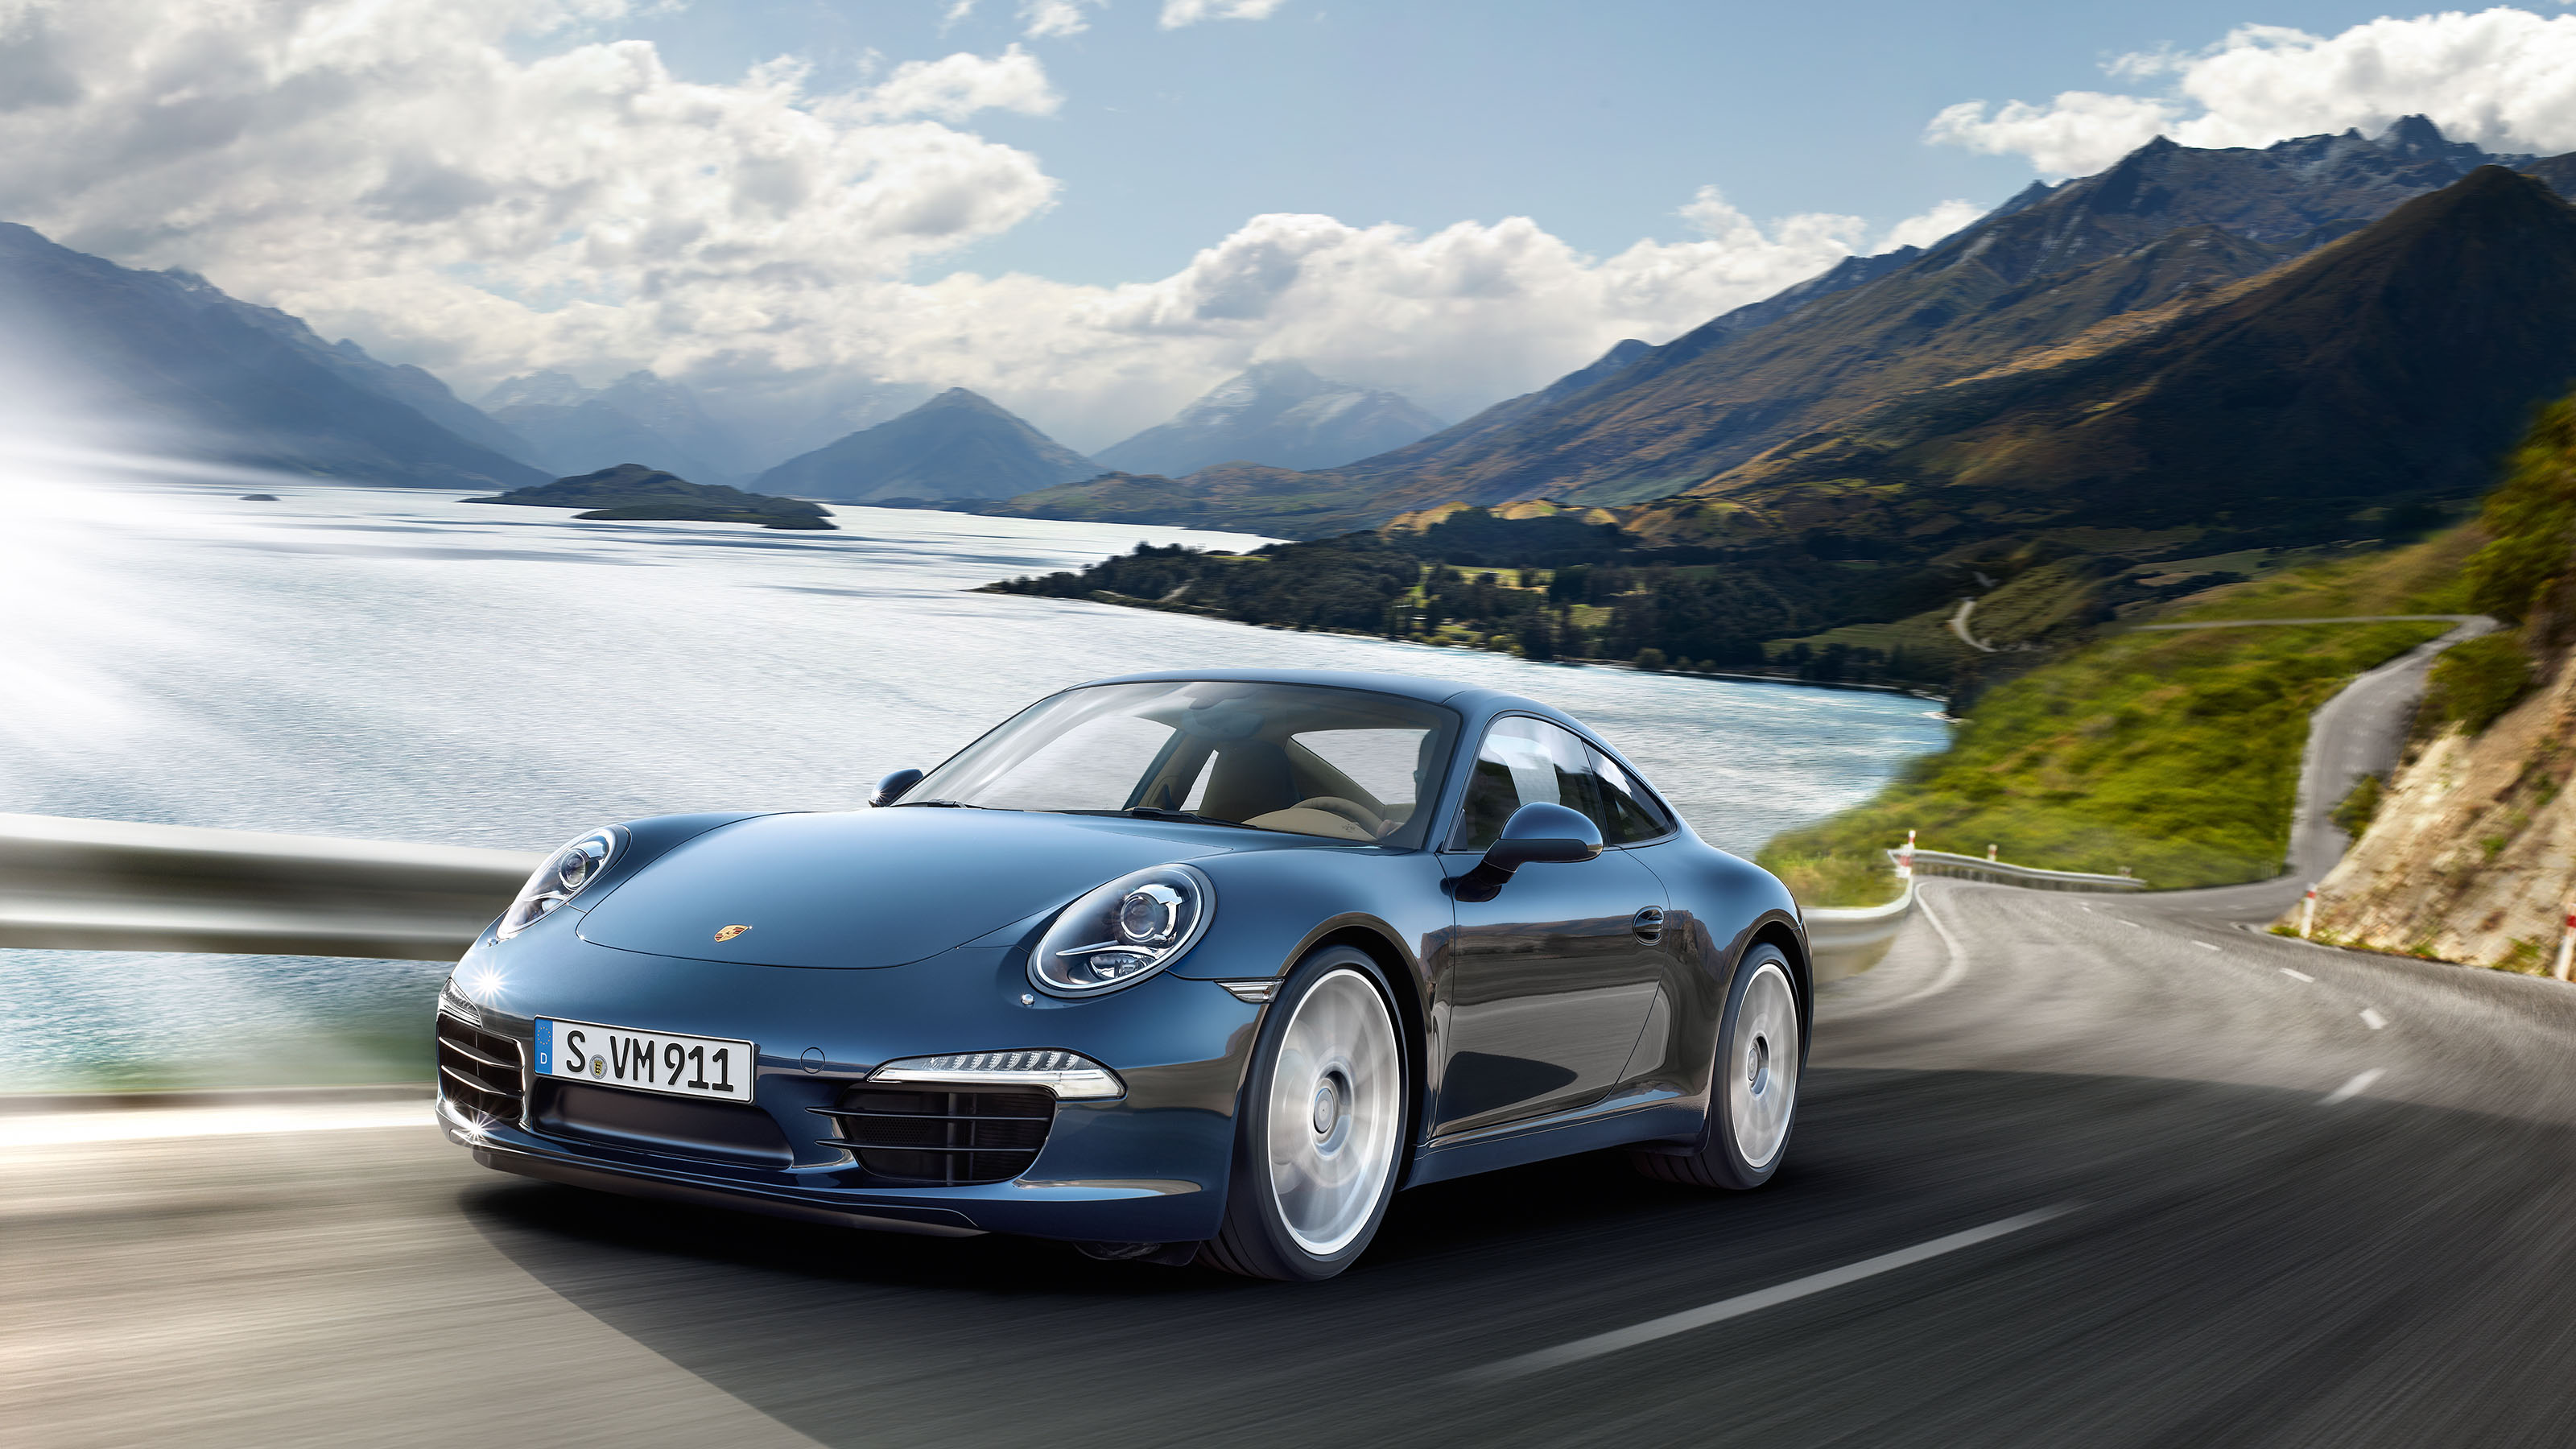 Porsche Approved preowned cars the best preowned Porsche available